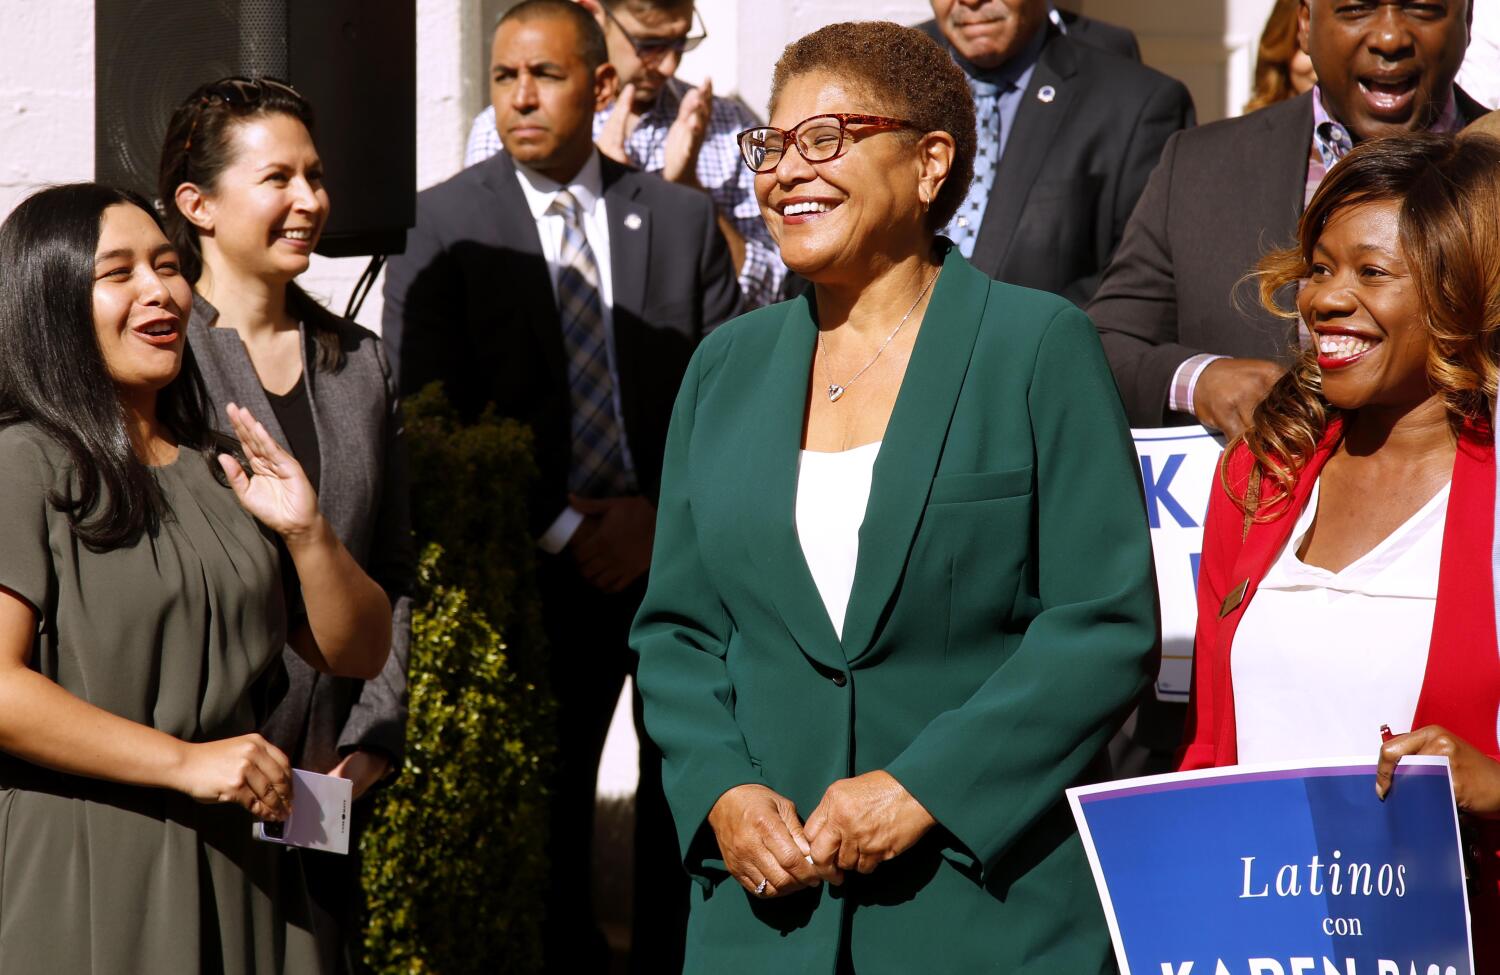 L.A. Mayor Karen Bass launches her reelection bid, saying, 'We cannot afford to stop our momentum'